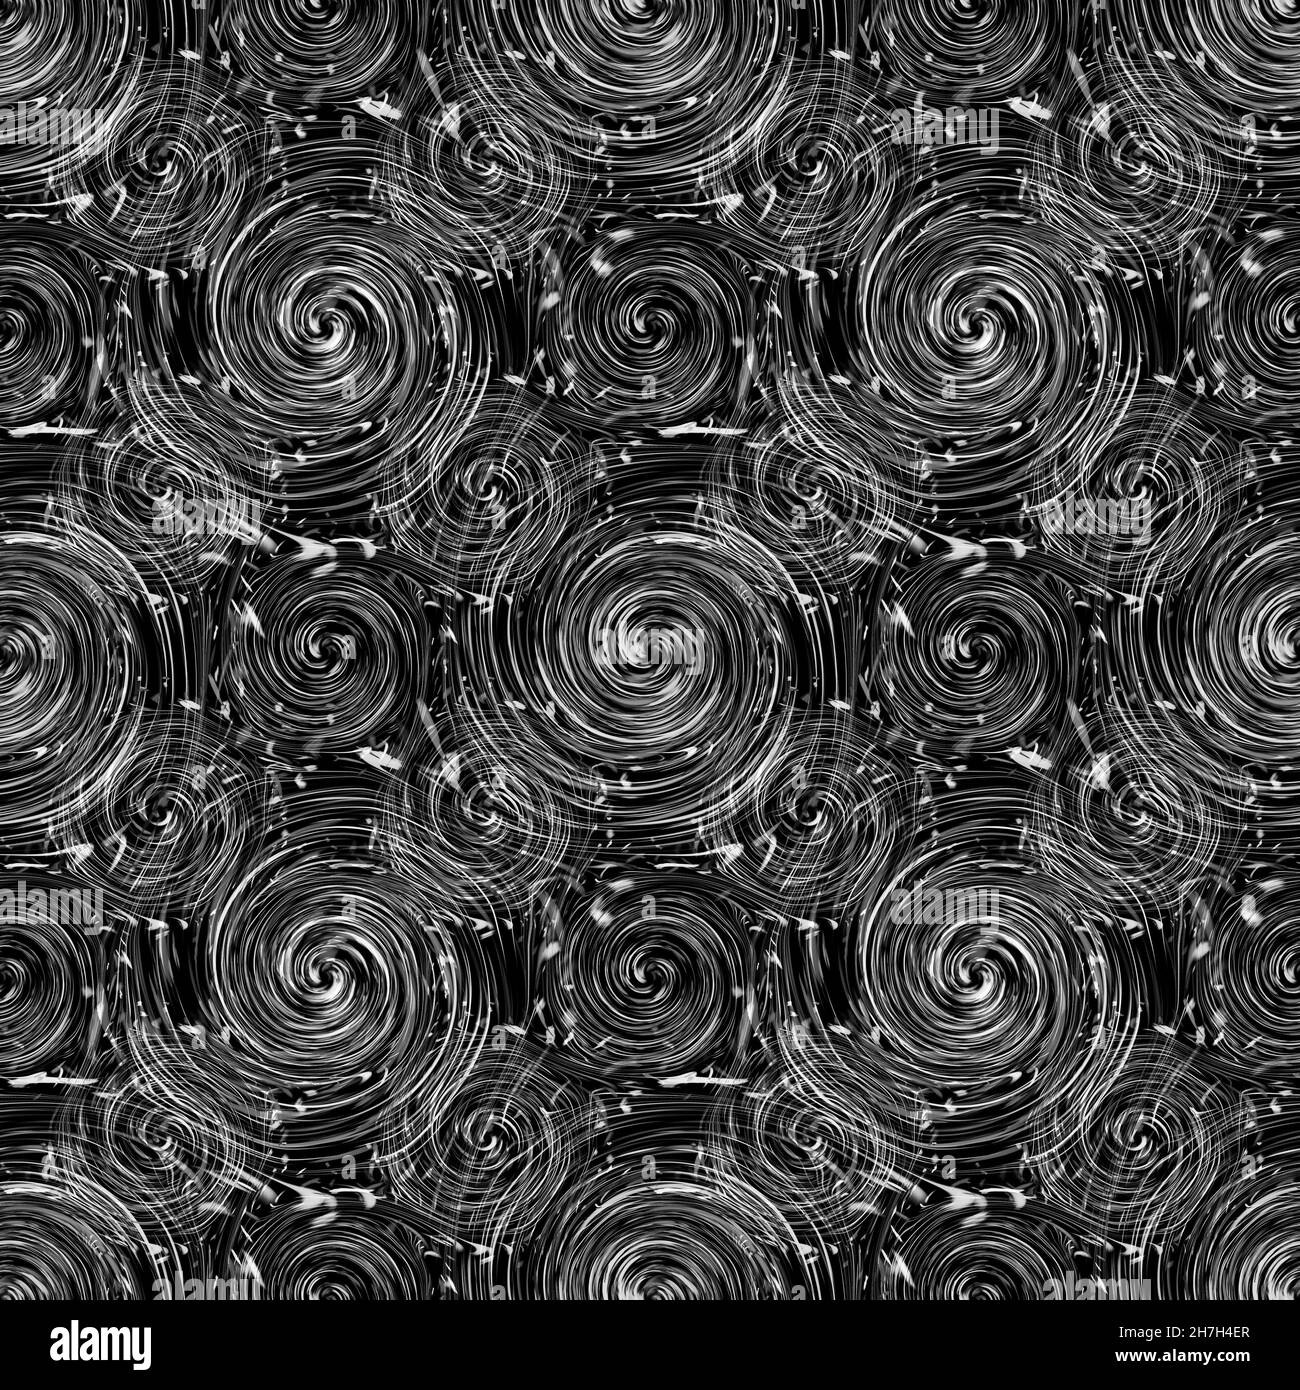 Abstract background. Seamless black and white abstract background pattern Stock Photo